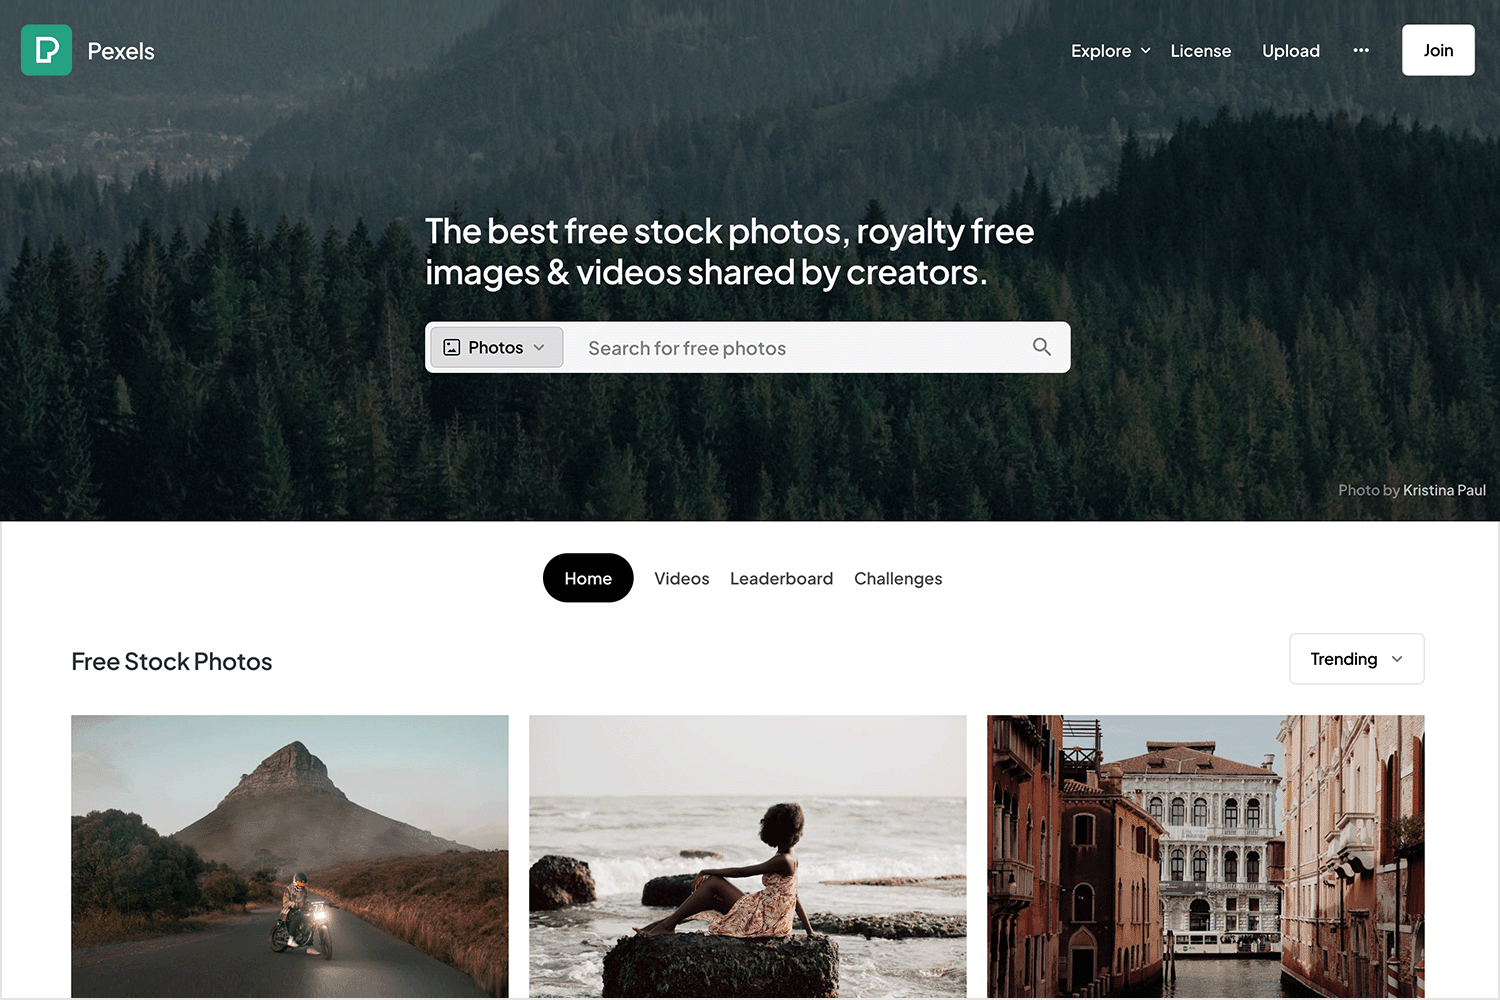 Pexels homepage featuring free stock photos, vectors, royalty-free images, and videos.